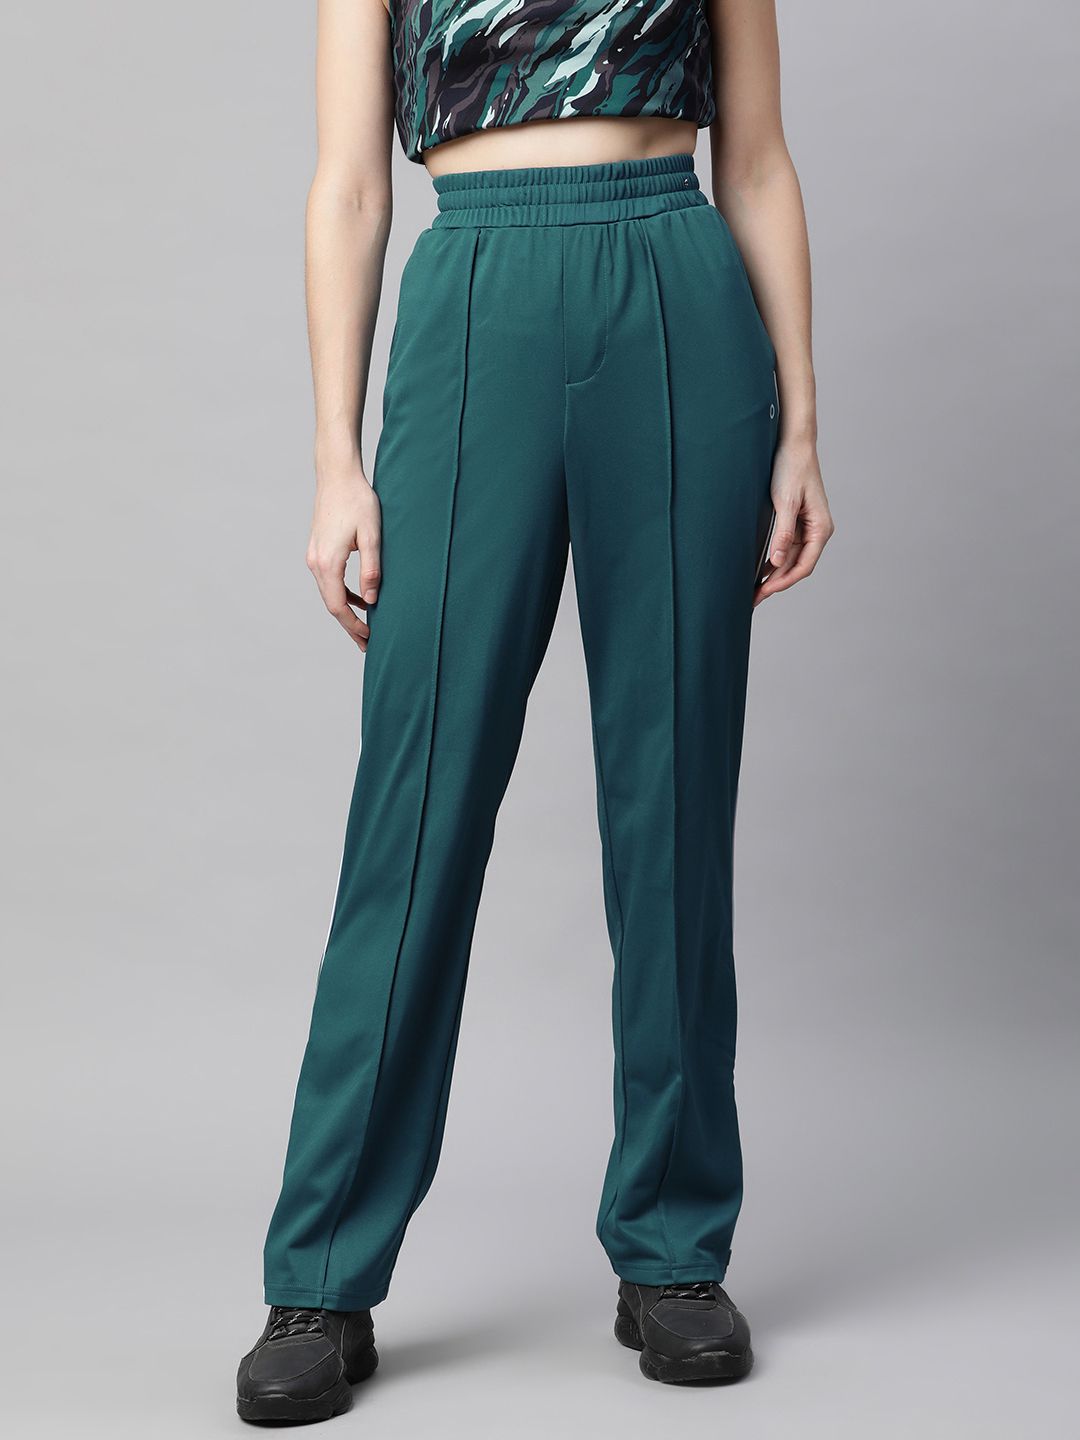 Marks & Spencer Women Teal Green Solid Mid-Rise Straight Fit Side Stripe Track Pants Price in India